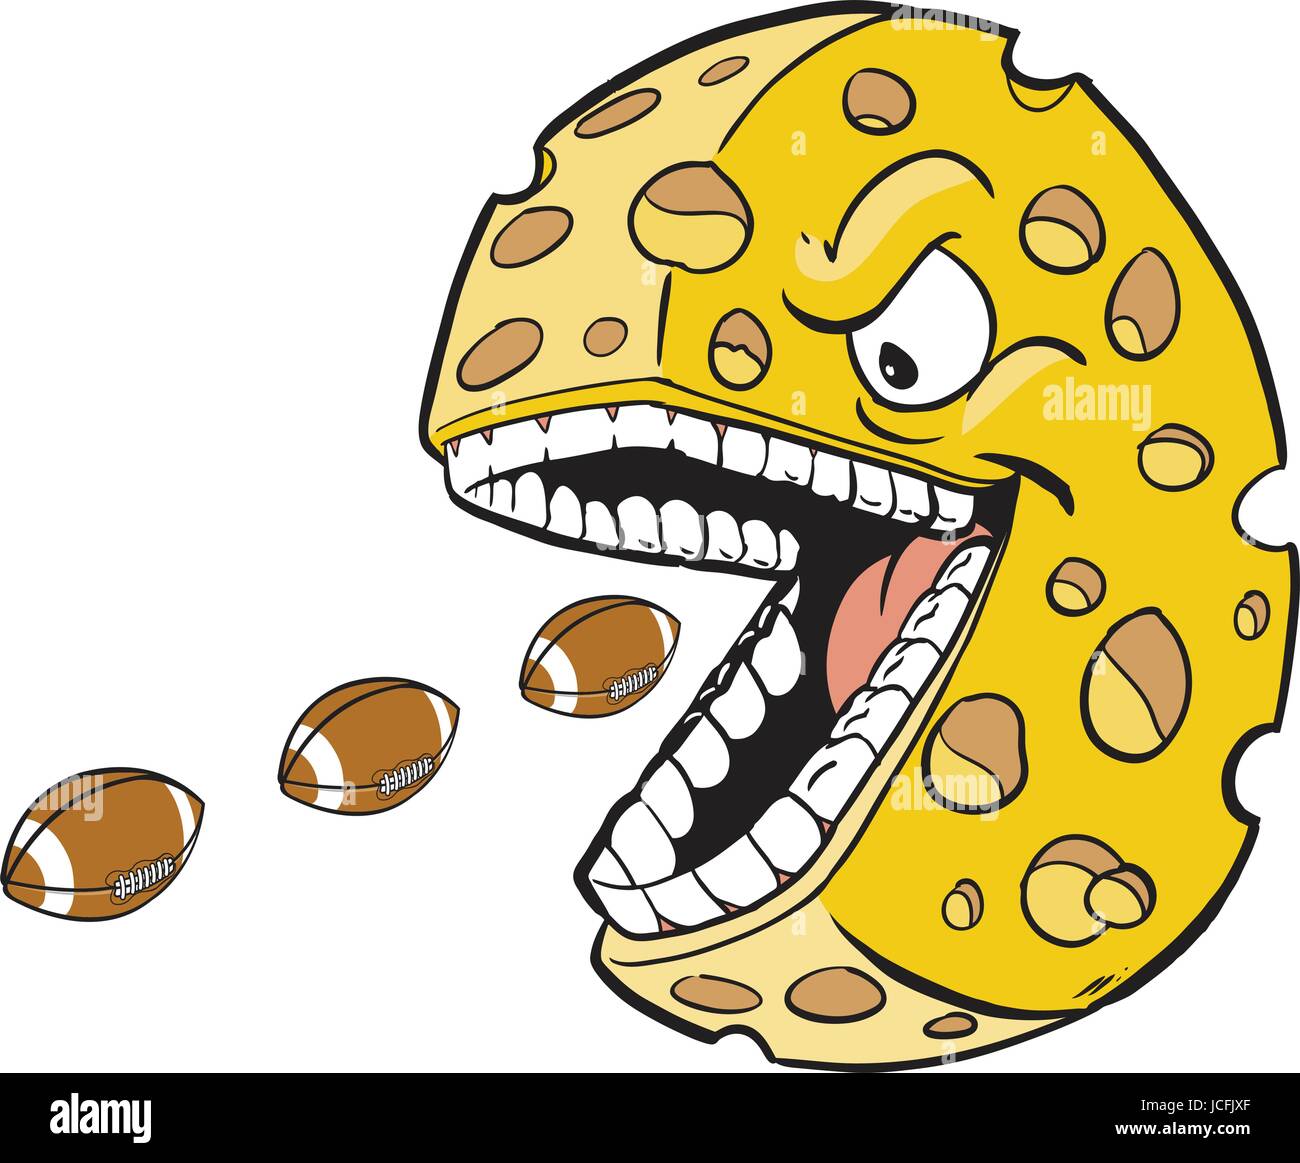 Vector cartoon clip art illustration of a cheese wheel or head mascot with a face and mouth eating footballs, which are on separate layer. Stock Vector